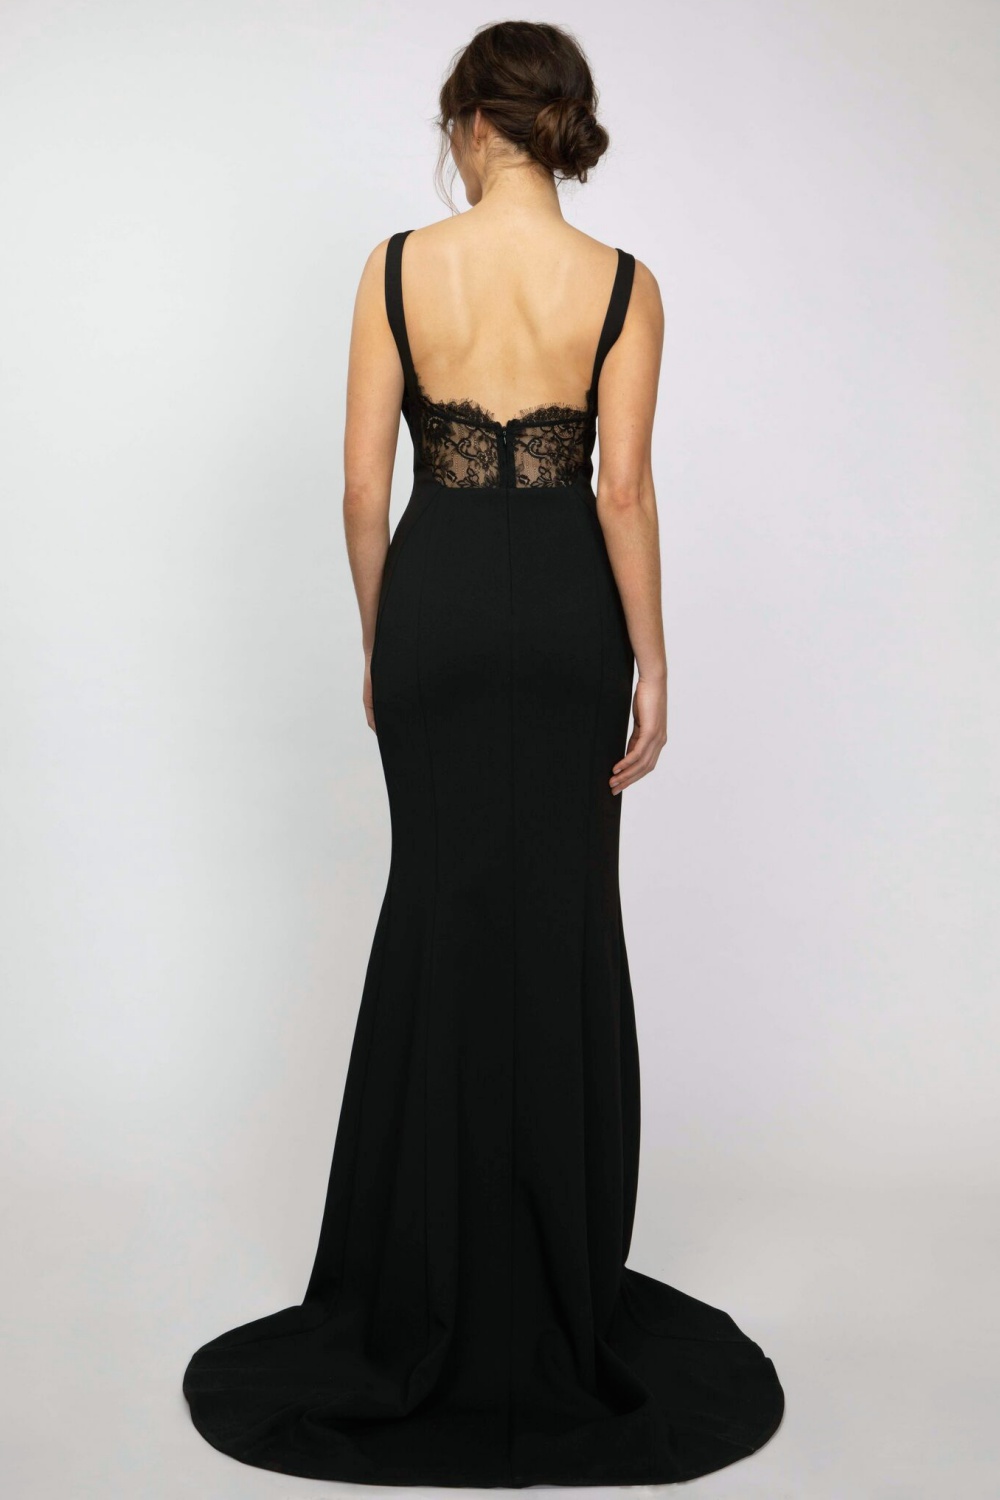 Sheer Lace Trim Gown With Split Black – Haute on High